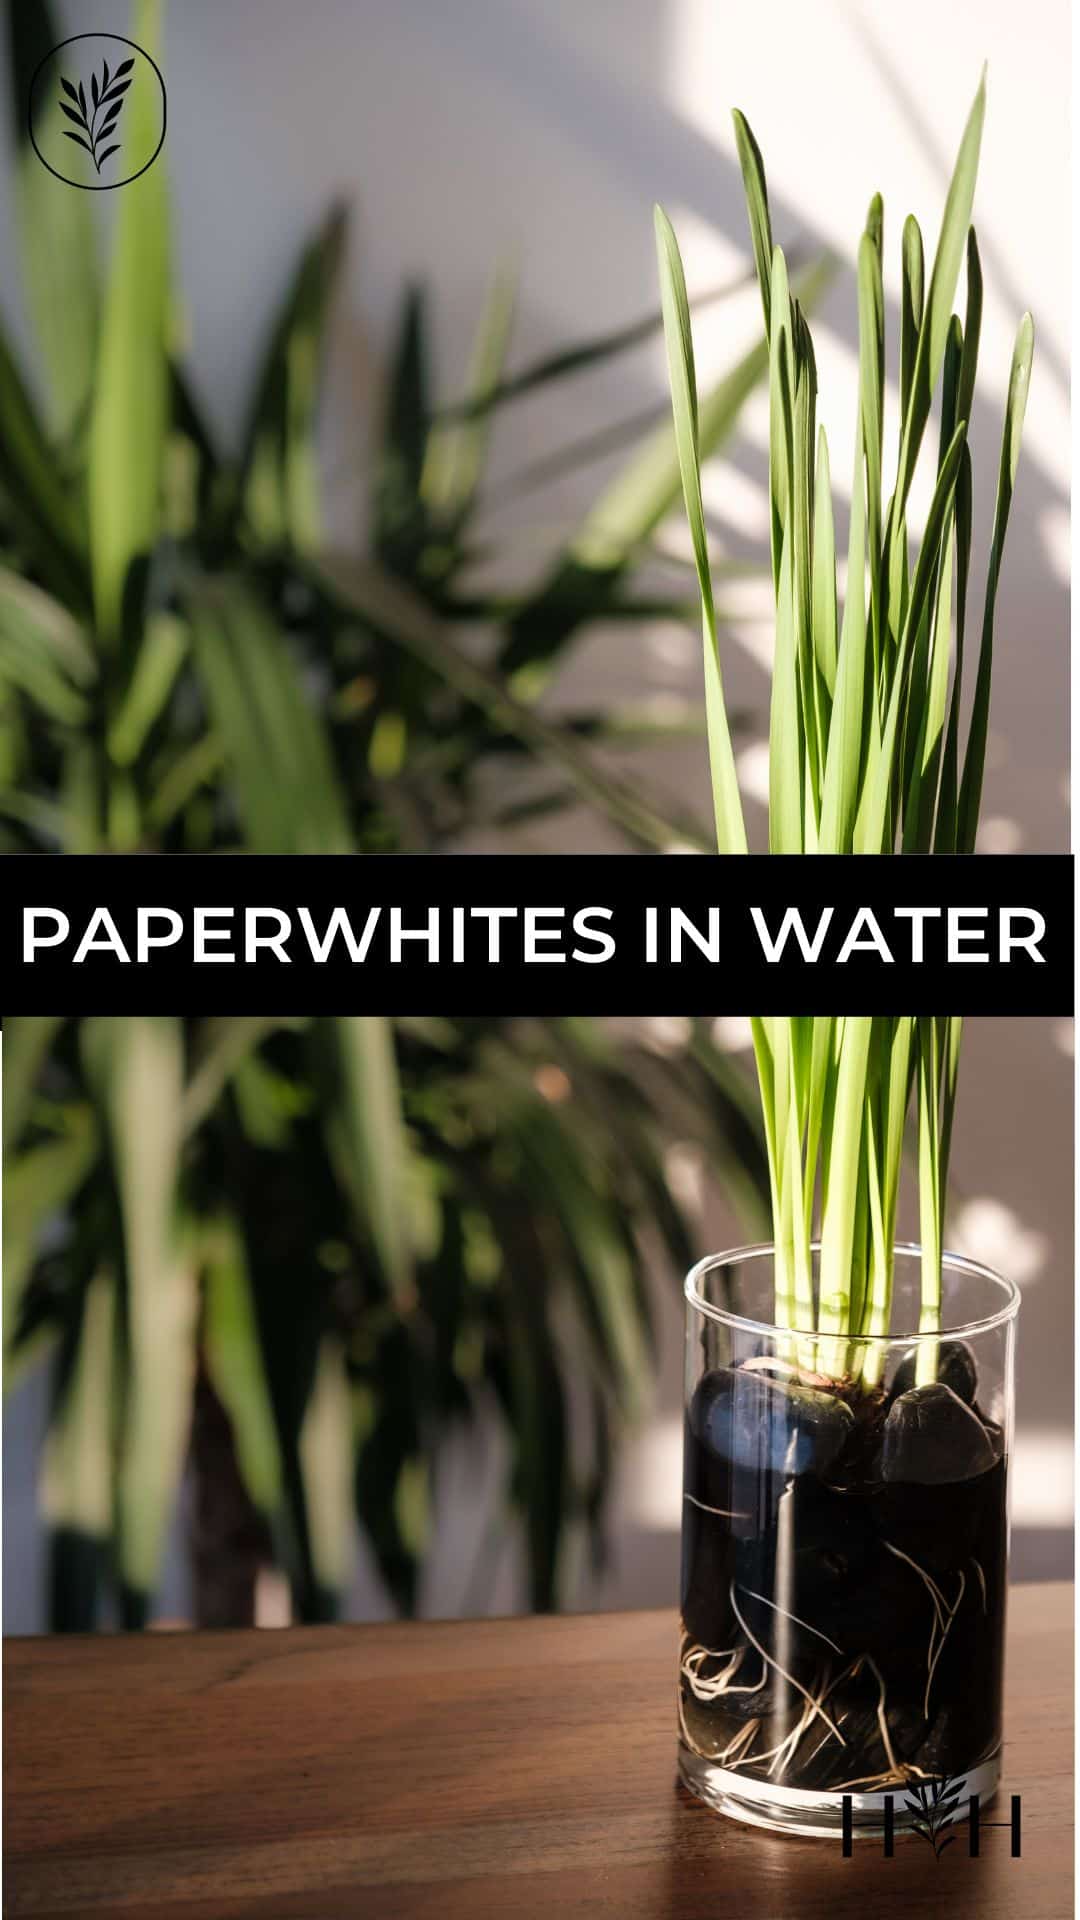 Paperwhites in water via @home4theharvest